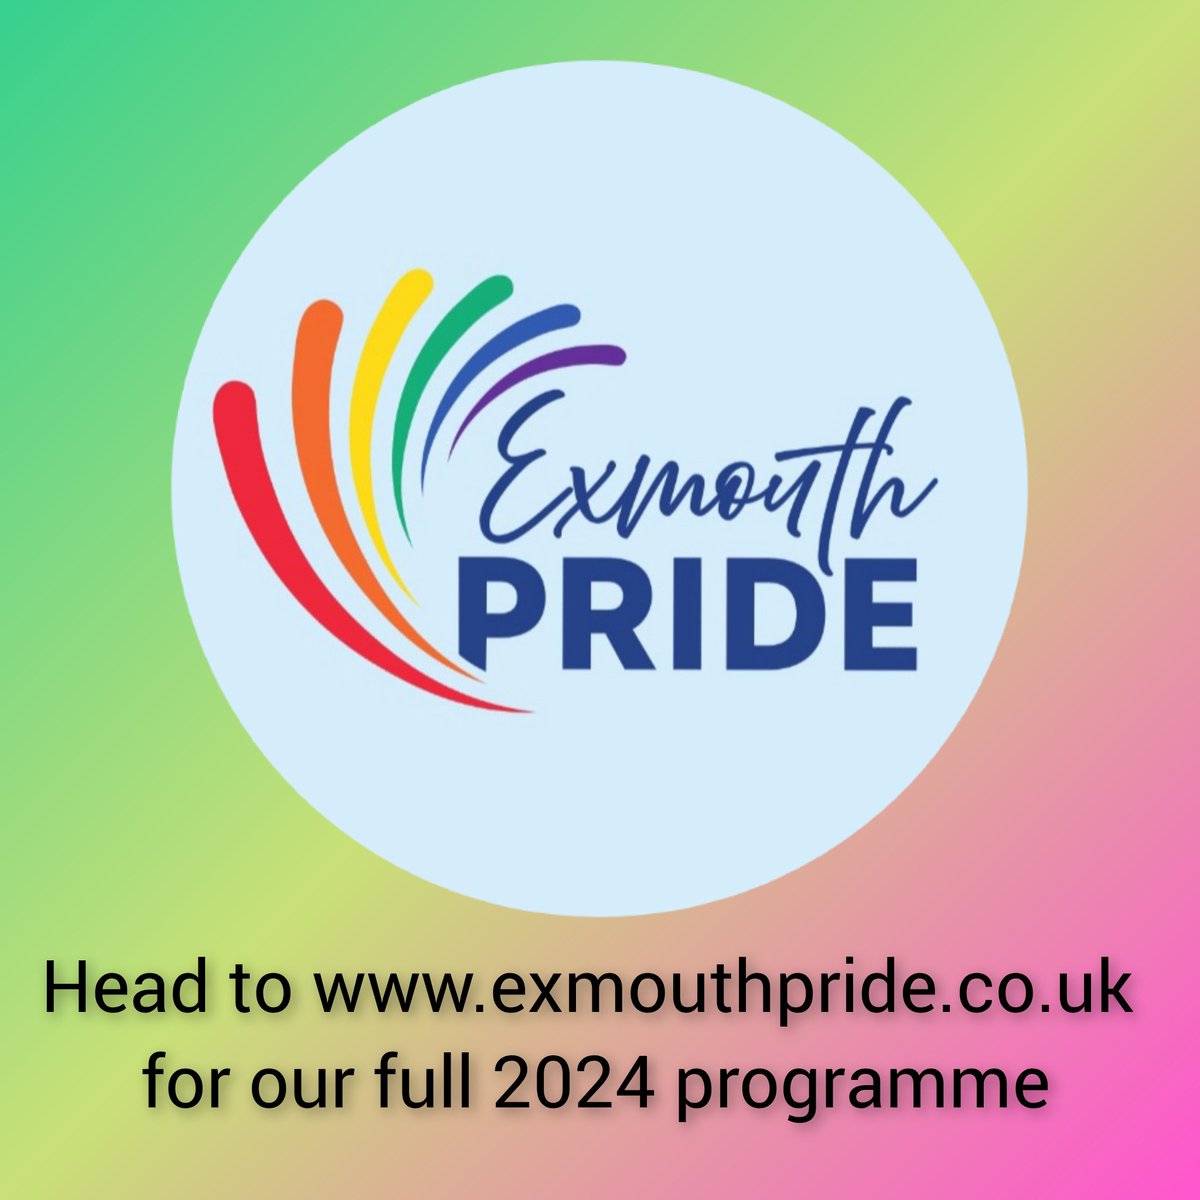 We are pleased to announce that our full #exmouthpride2024 programme is now live at exmouthpride.co.uk Click the link in our bio for more information. We look forward to seeing you on 22nd June 2024 in Manor Gardens #savethedate